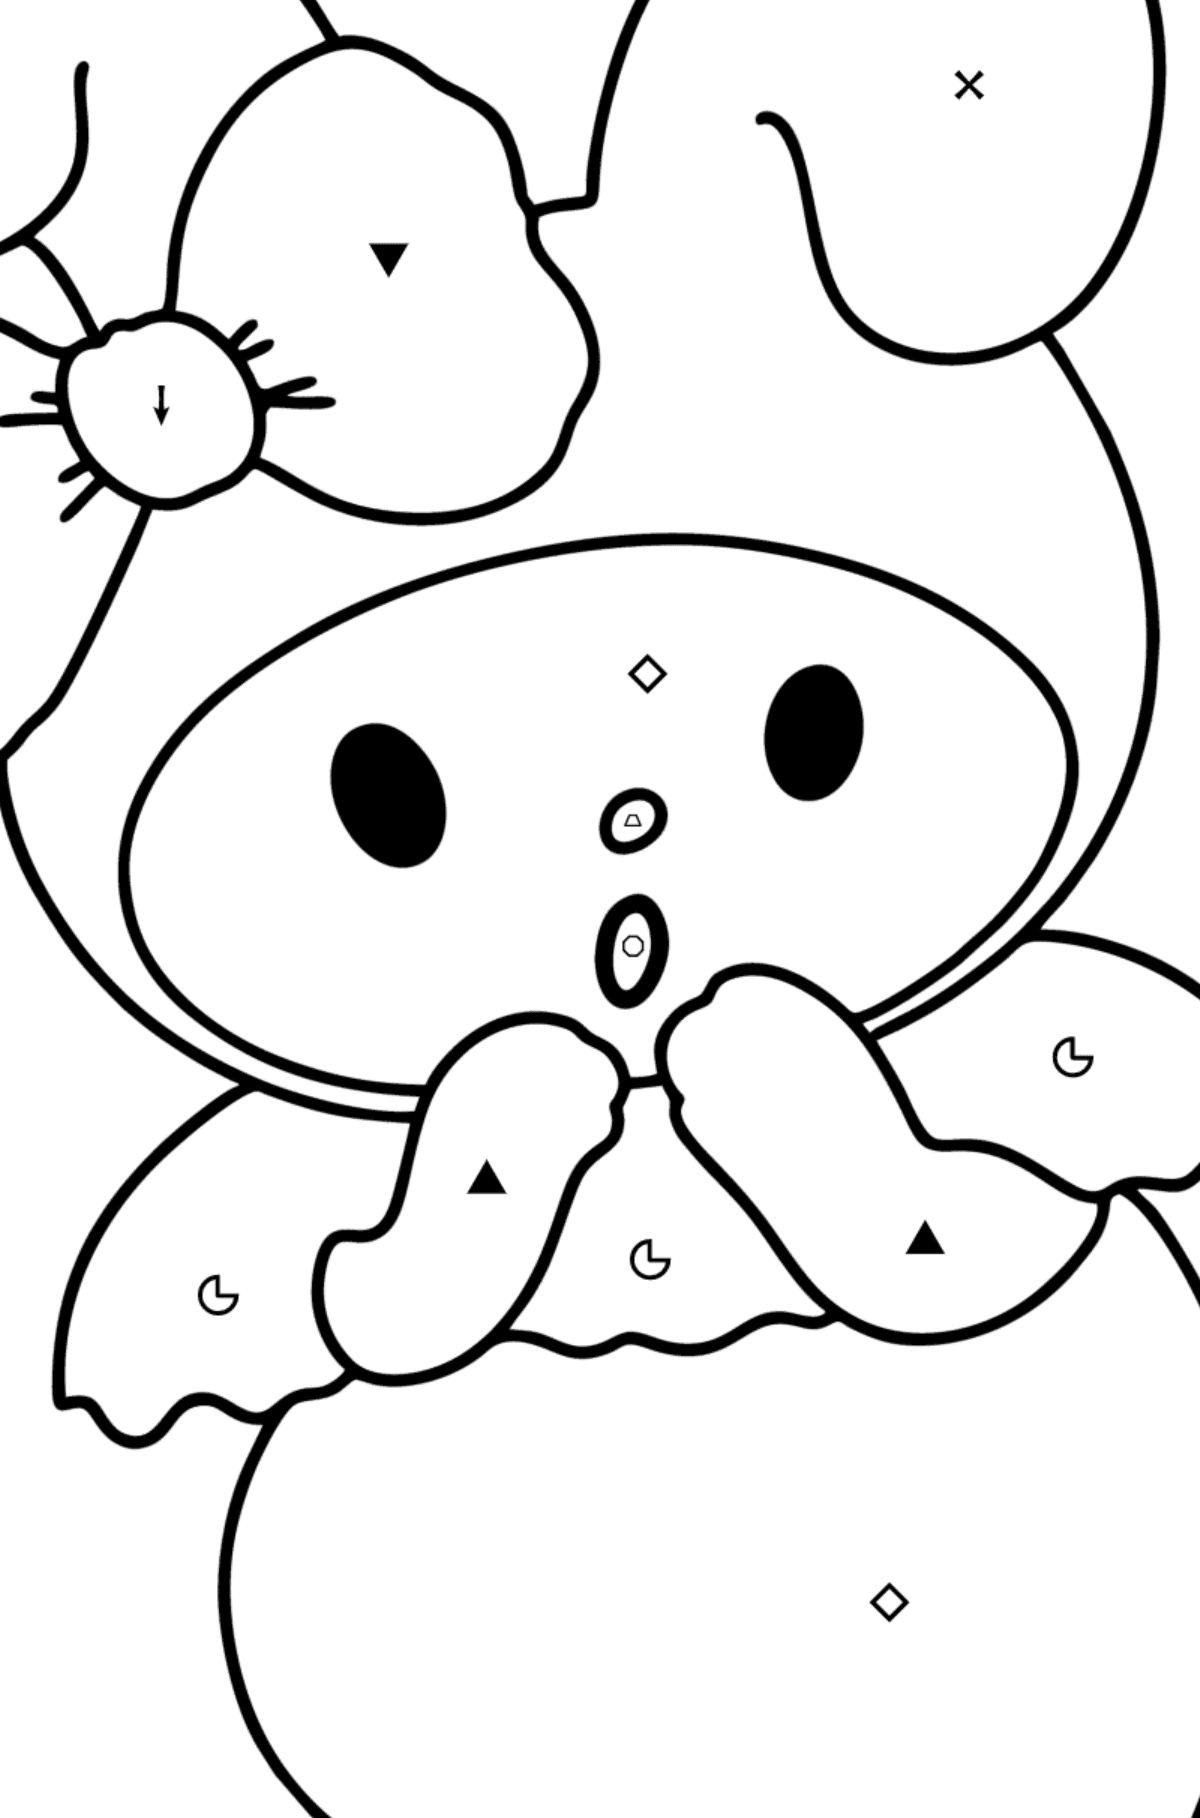 Hello Kitty My Melody coloring page - Coloring by Symbols and Geometric Shapes for Kids